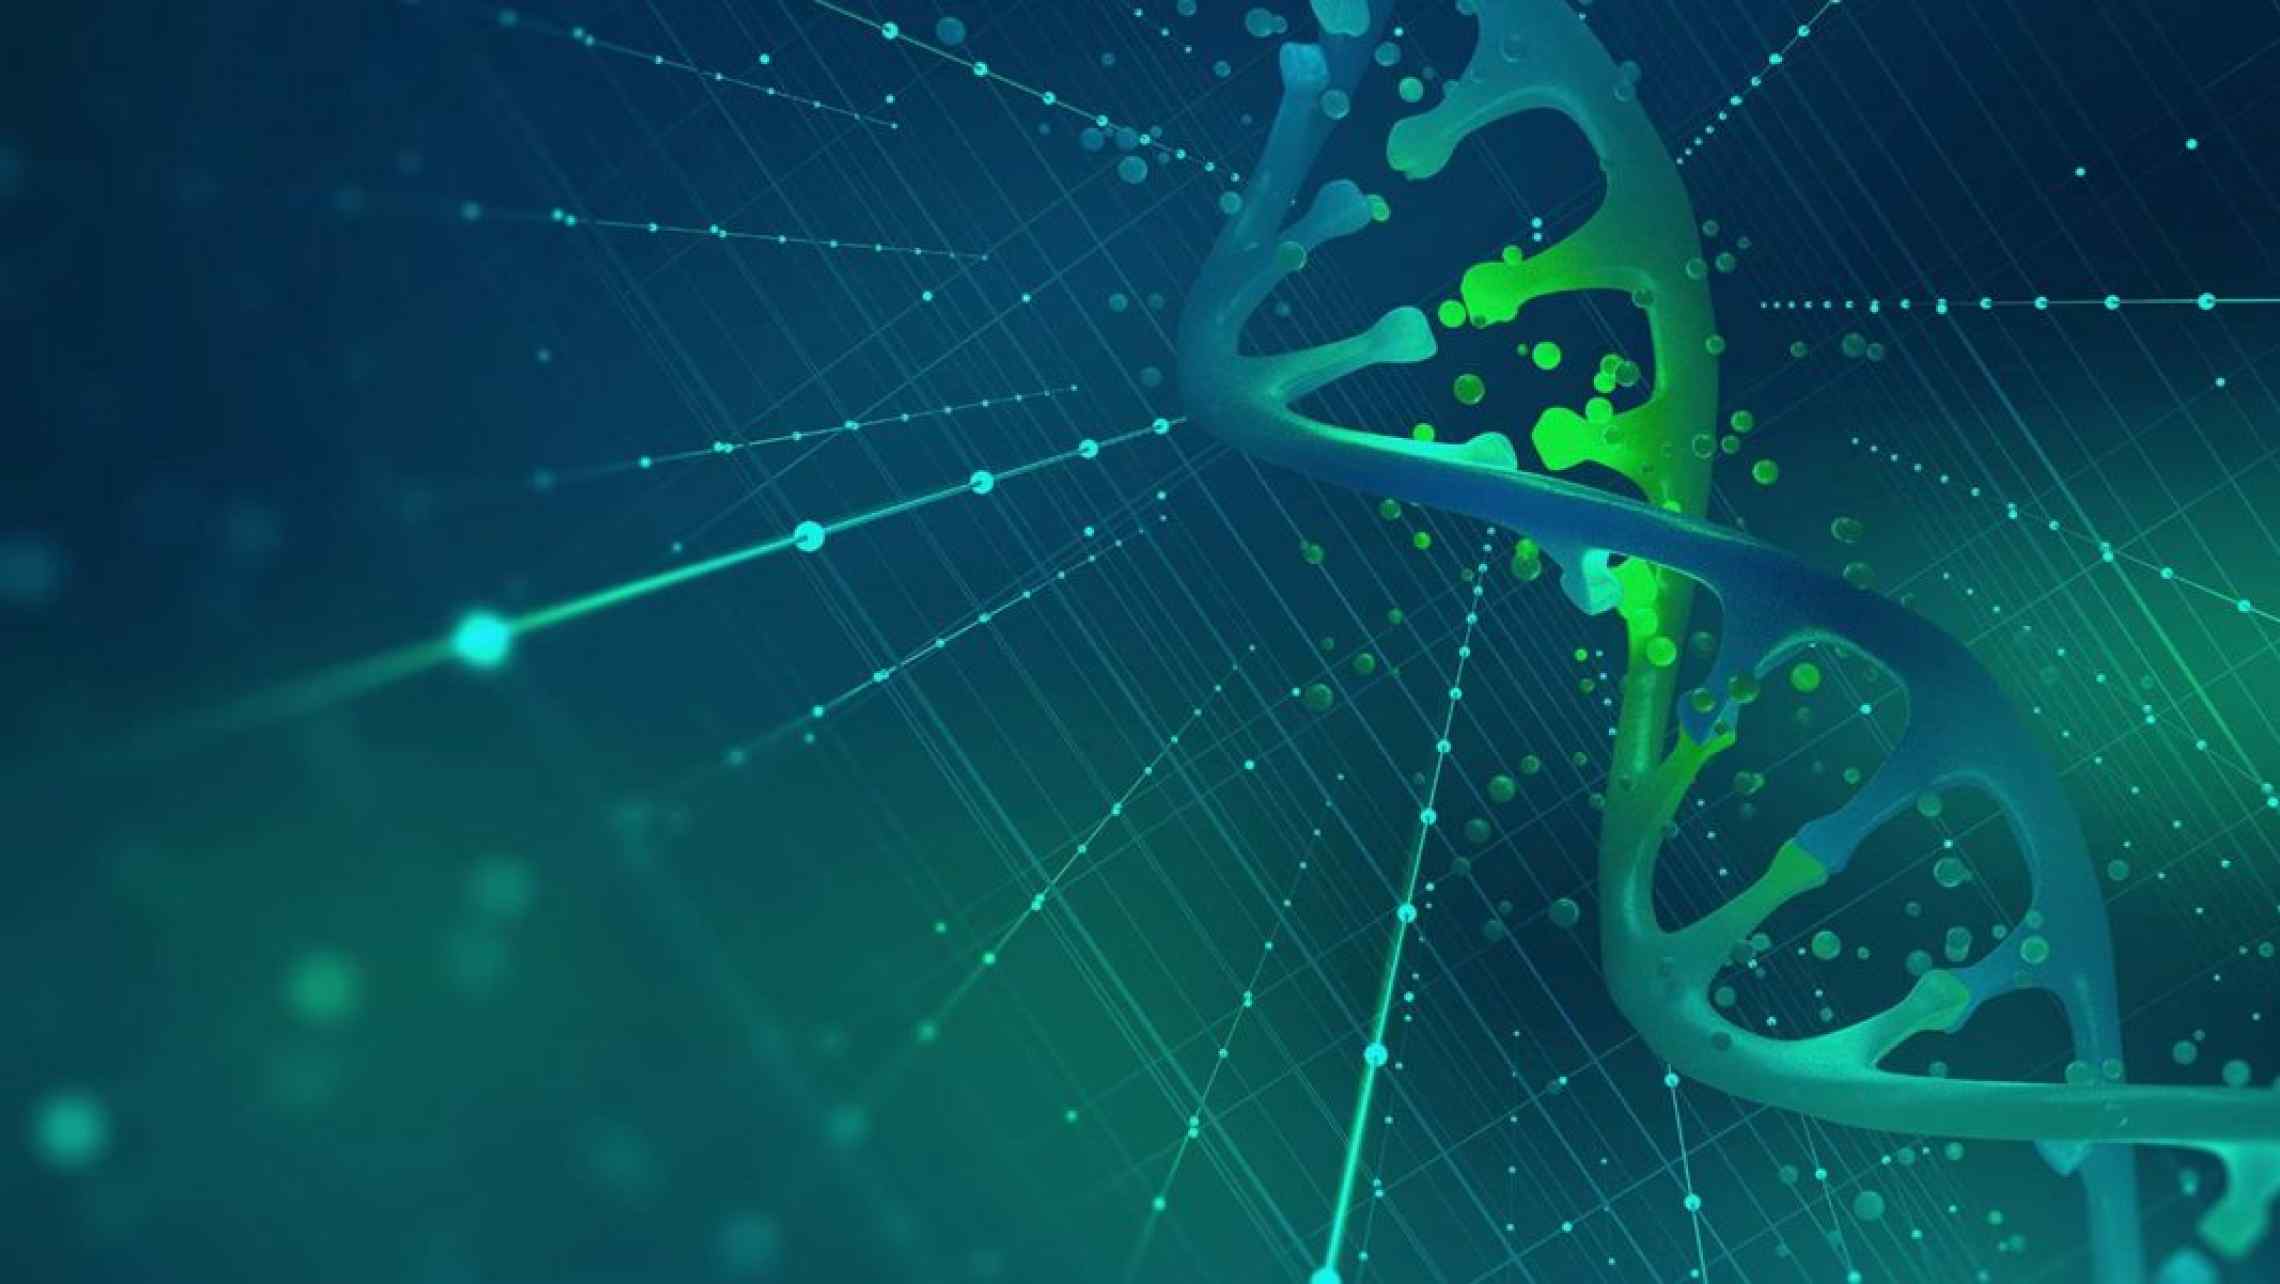 NEW DNA SYNTHESIS METHOD COULD SOON BUILD A GENOME IN A DAY